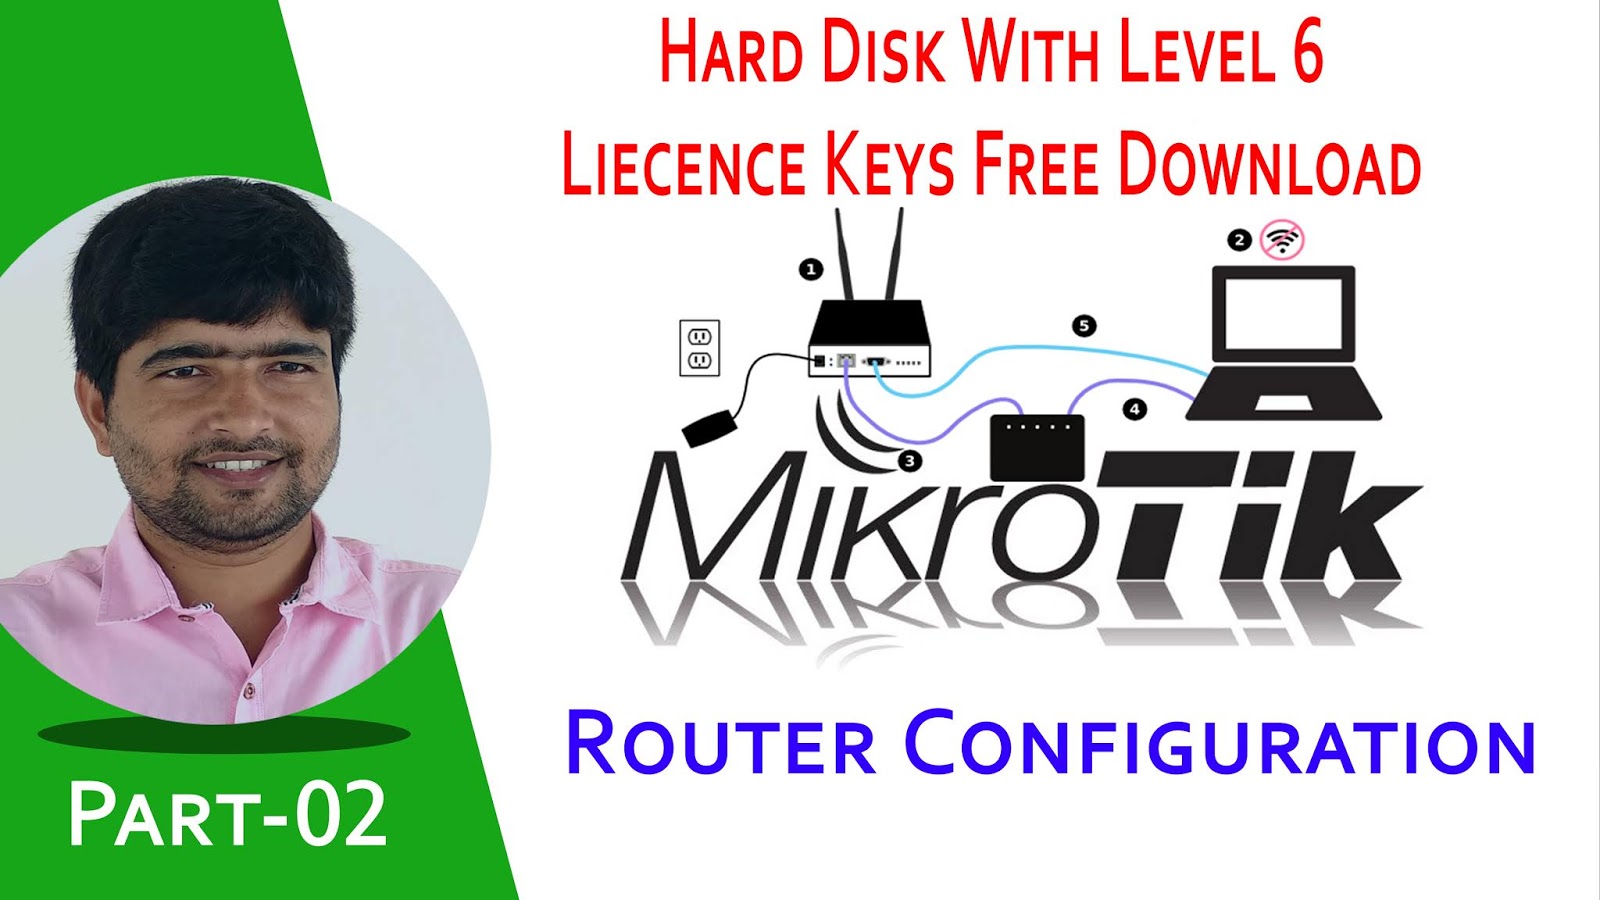 mikrotik router configuration step by step pdf